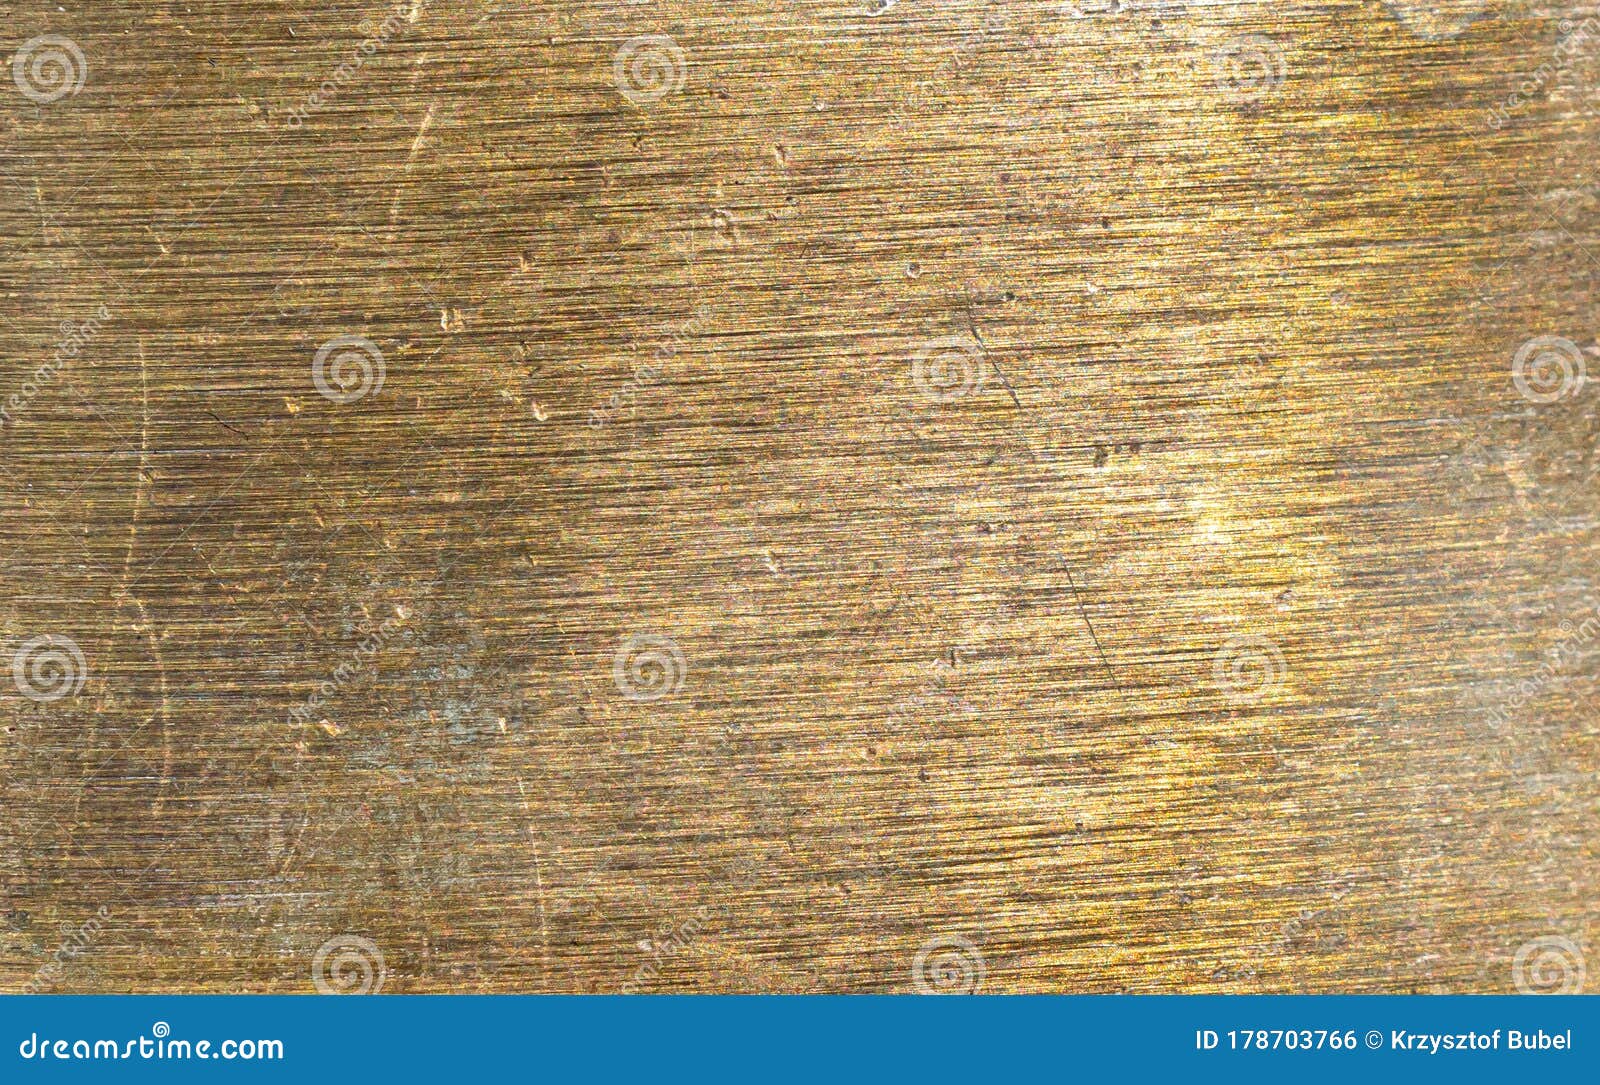 old brass sheet with visible details. textura